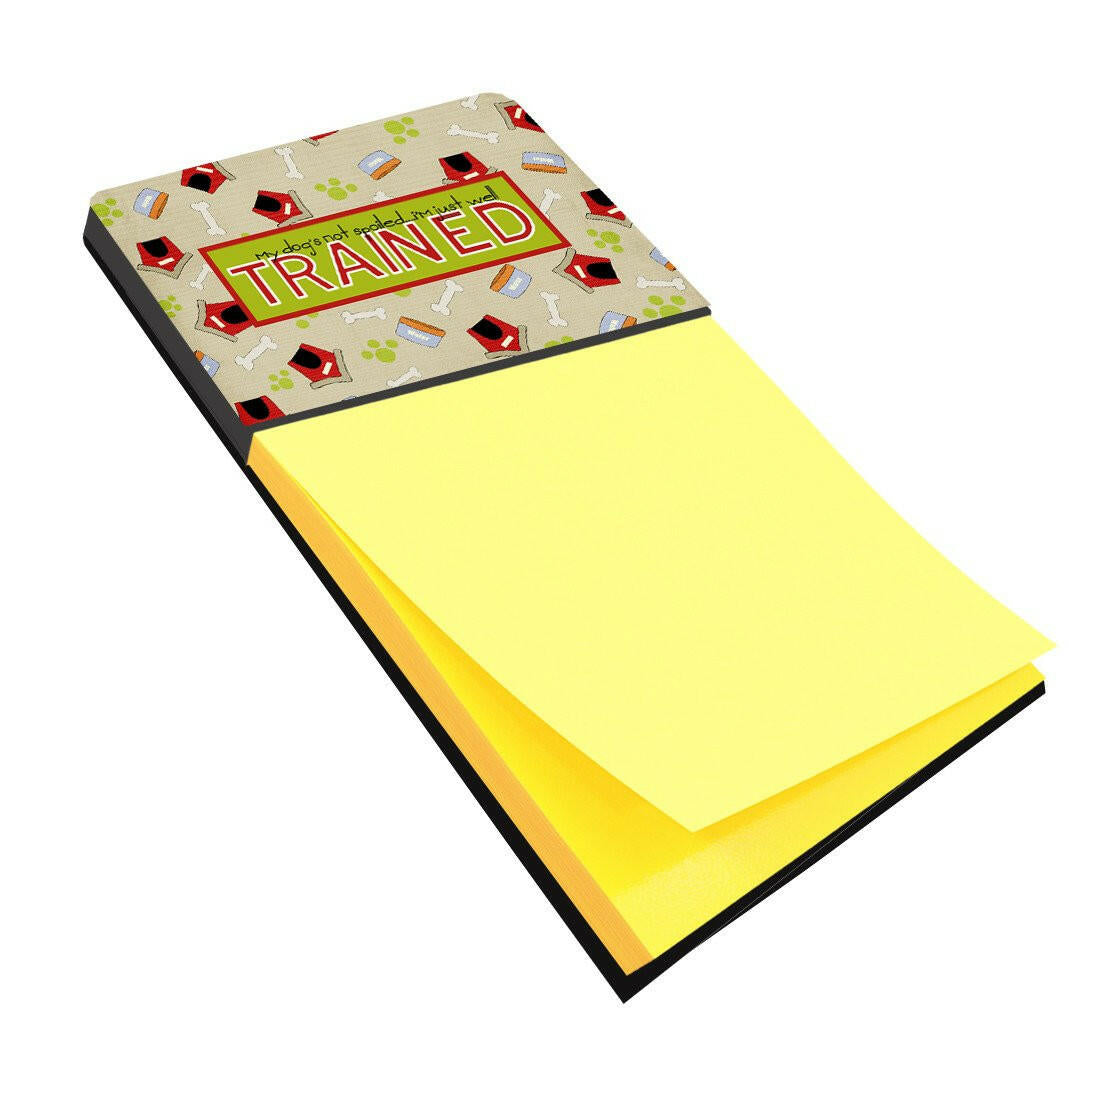 My Dog's not spoiled I'm just well trained Refiillable Sticky Note Holder or Postit Note Dispenser SB3051SN by Caroline's Treasures